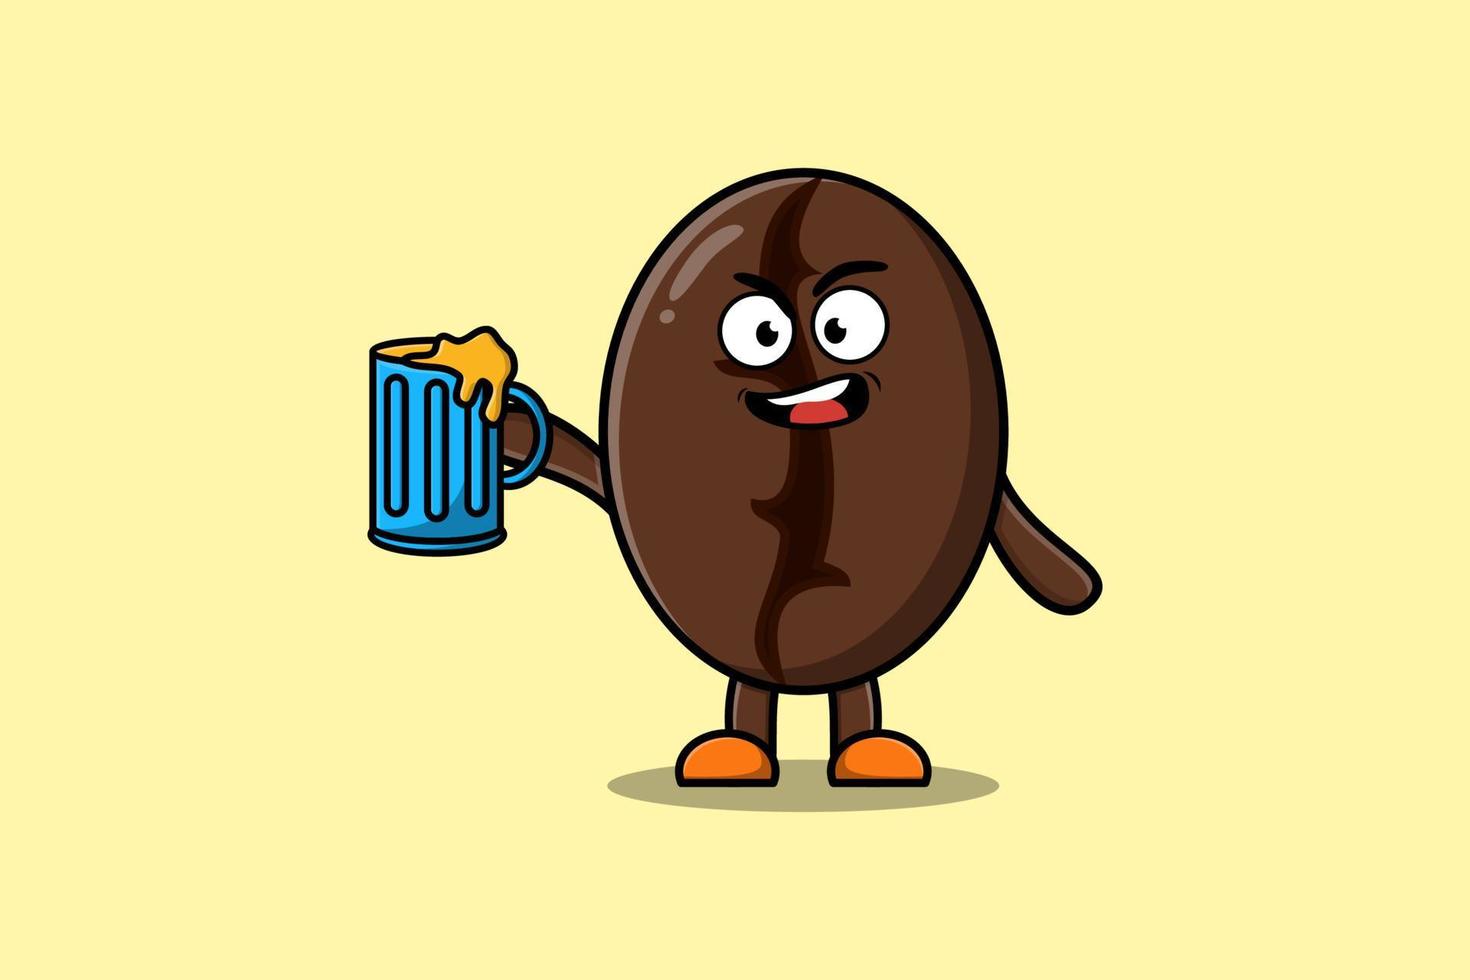 Cute Coffee beans cartoon mascot with beer glass vector